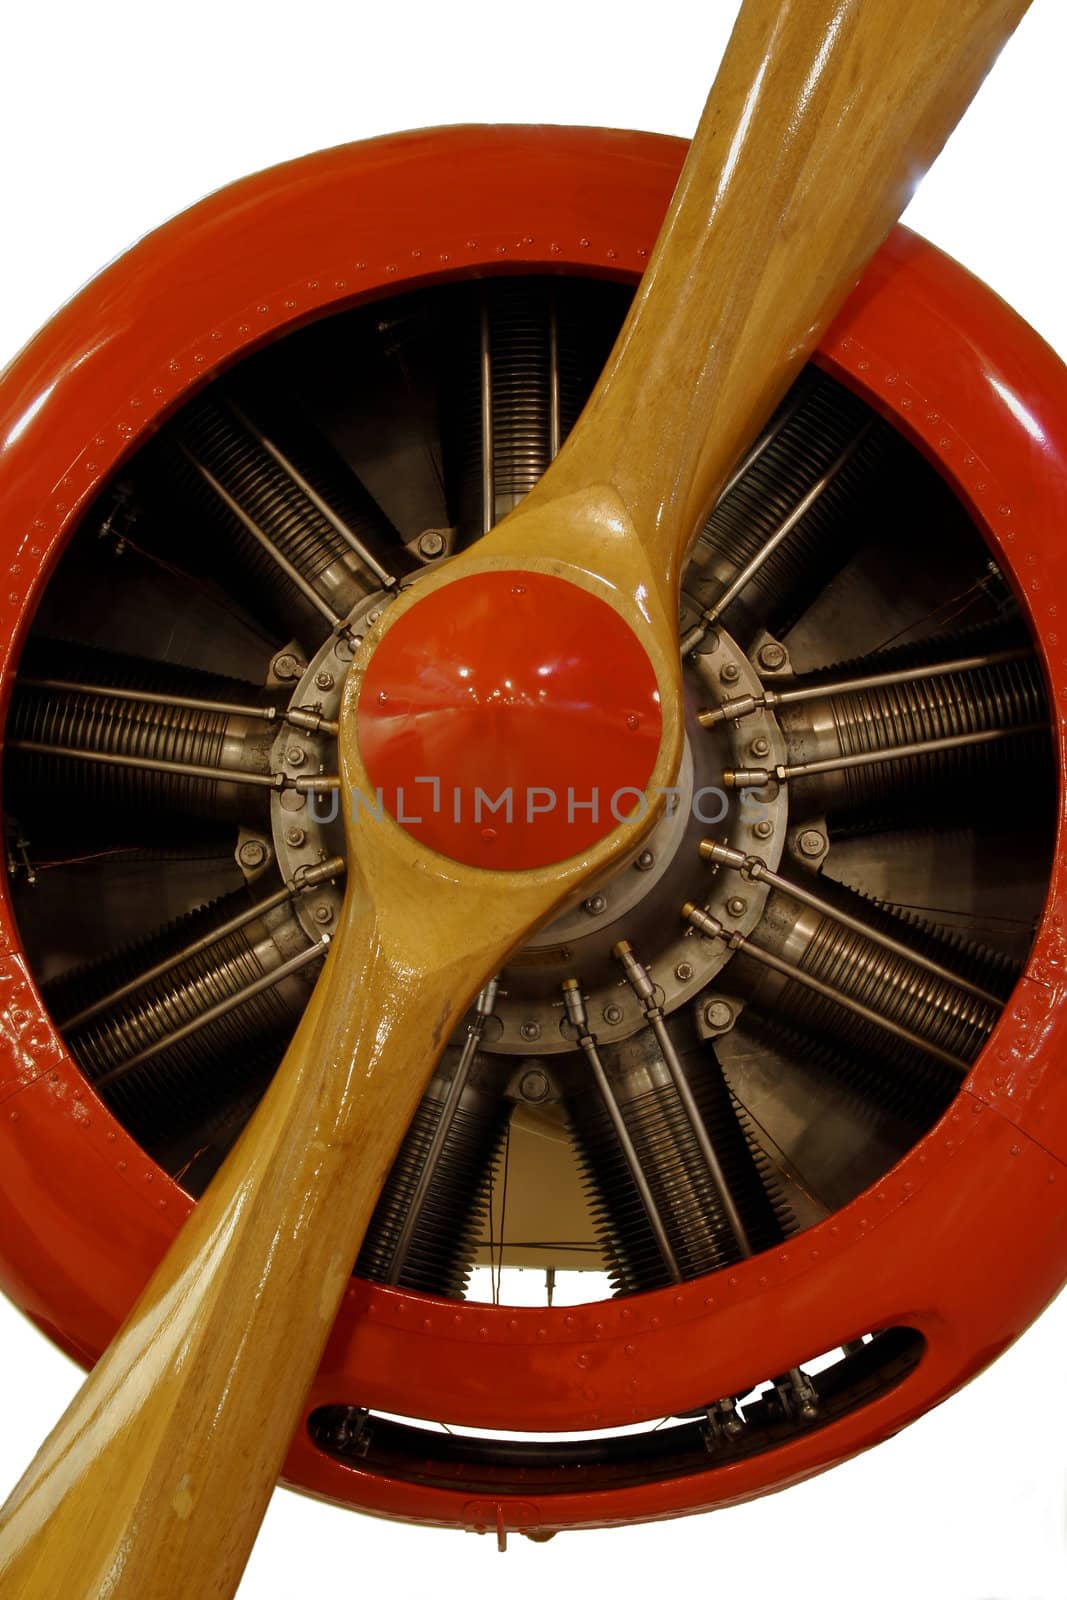 Wooden Propeller on a Red Plane